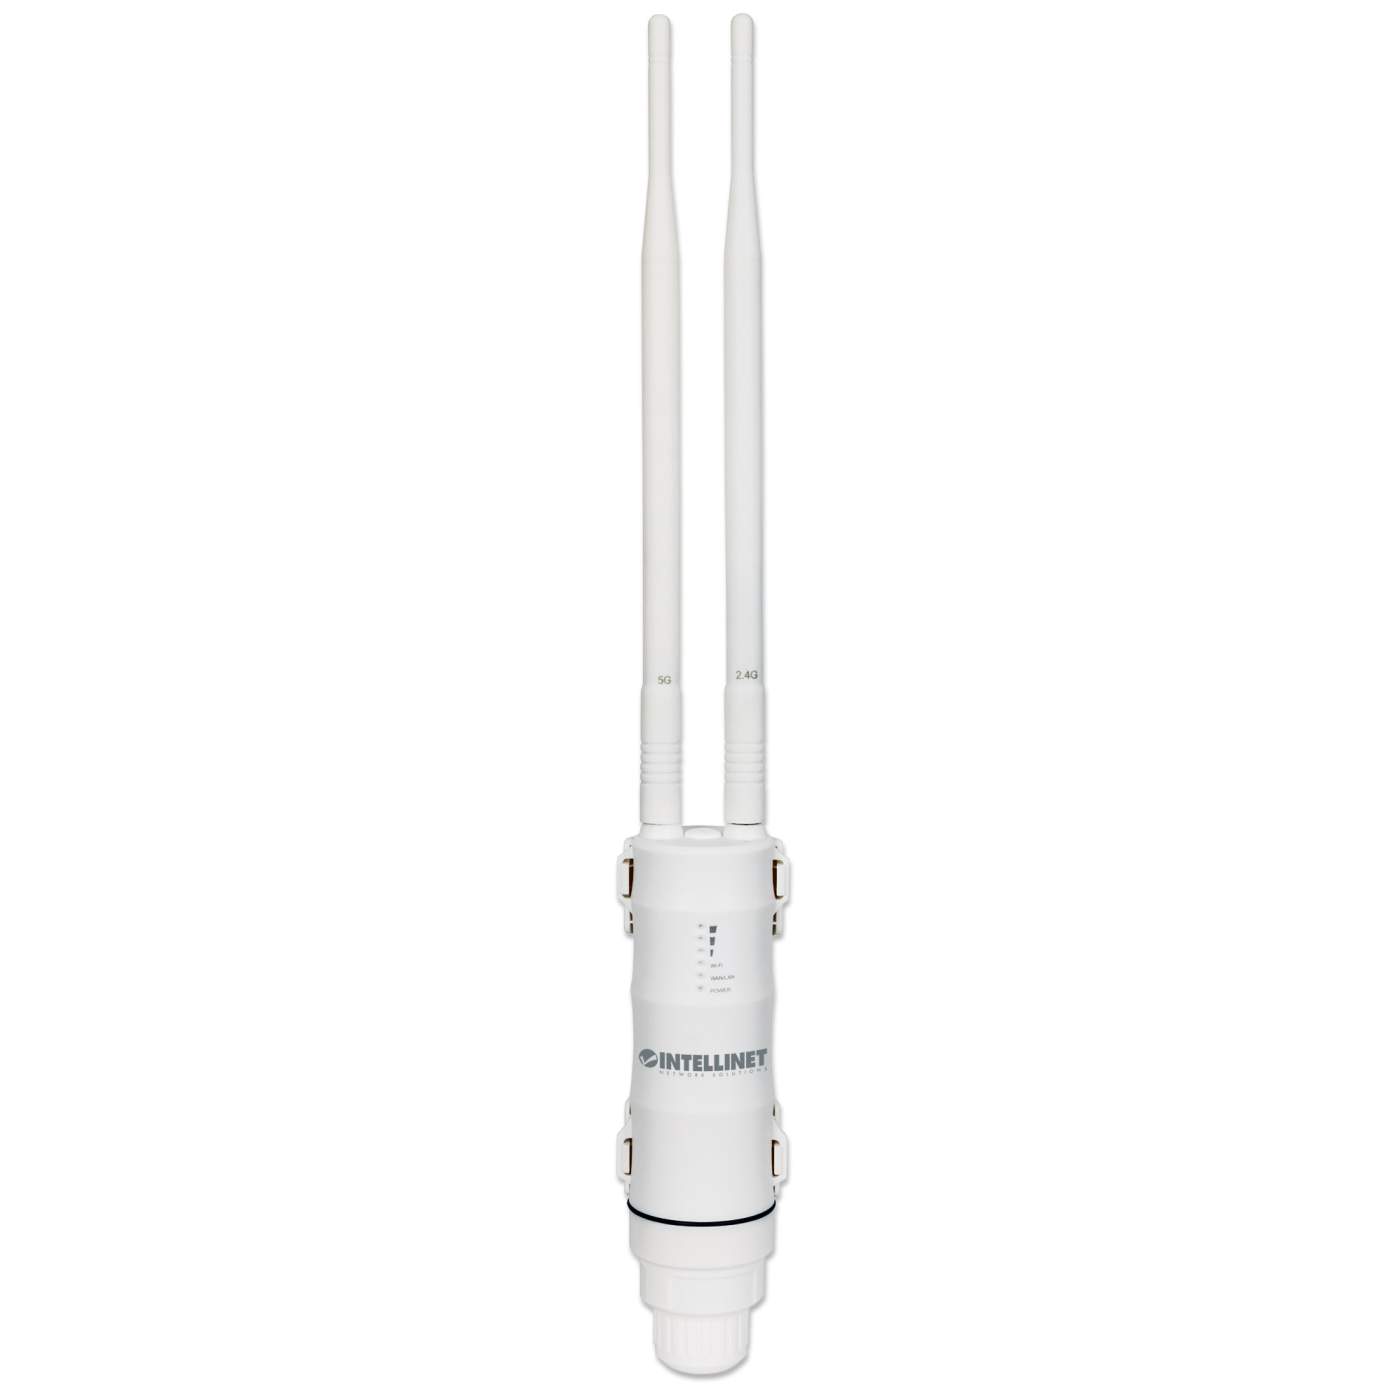 High-Power Wireless AC600 Dual-Band Outdoor Access Point Image 4